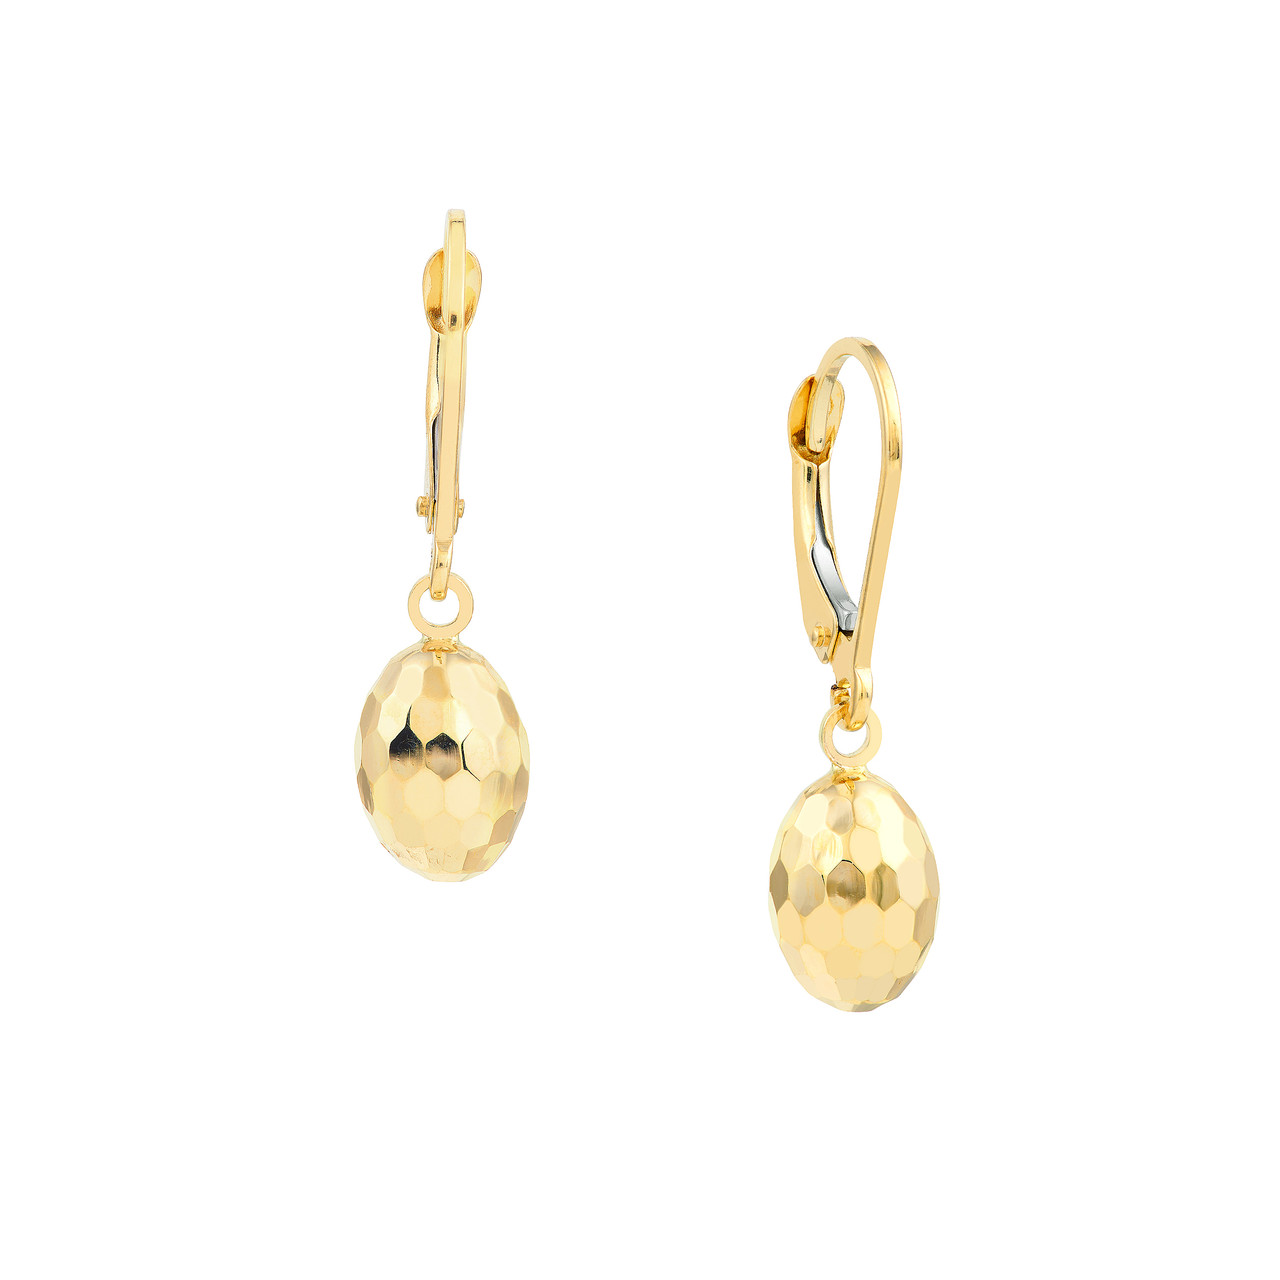 Textured Egg-Shaped Earrings on Leverback